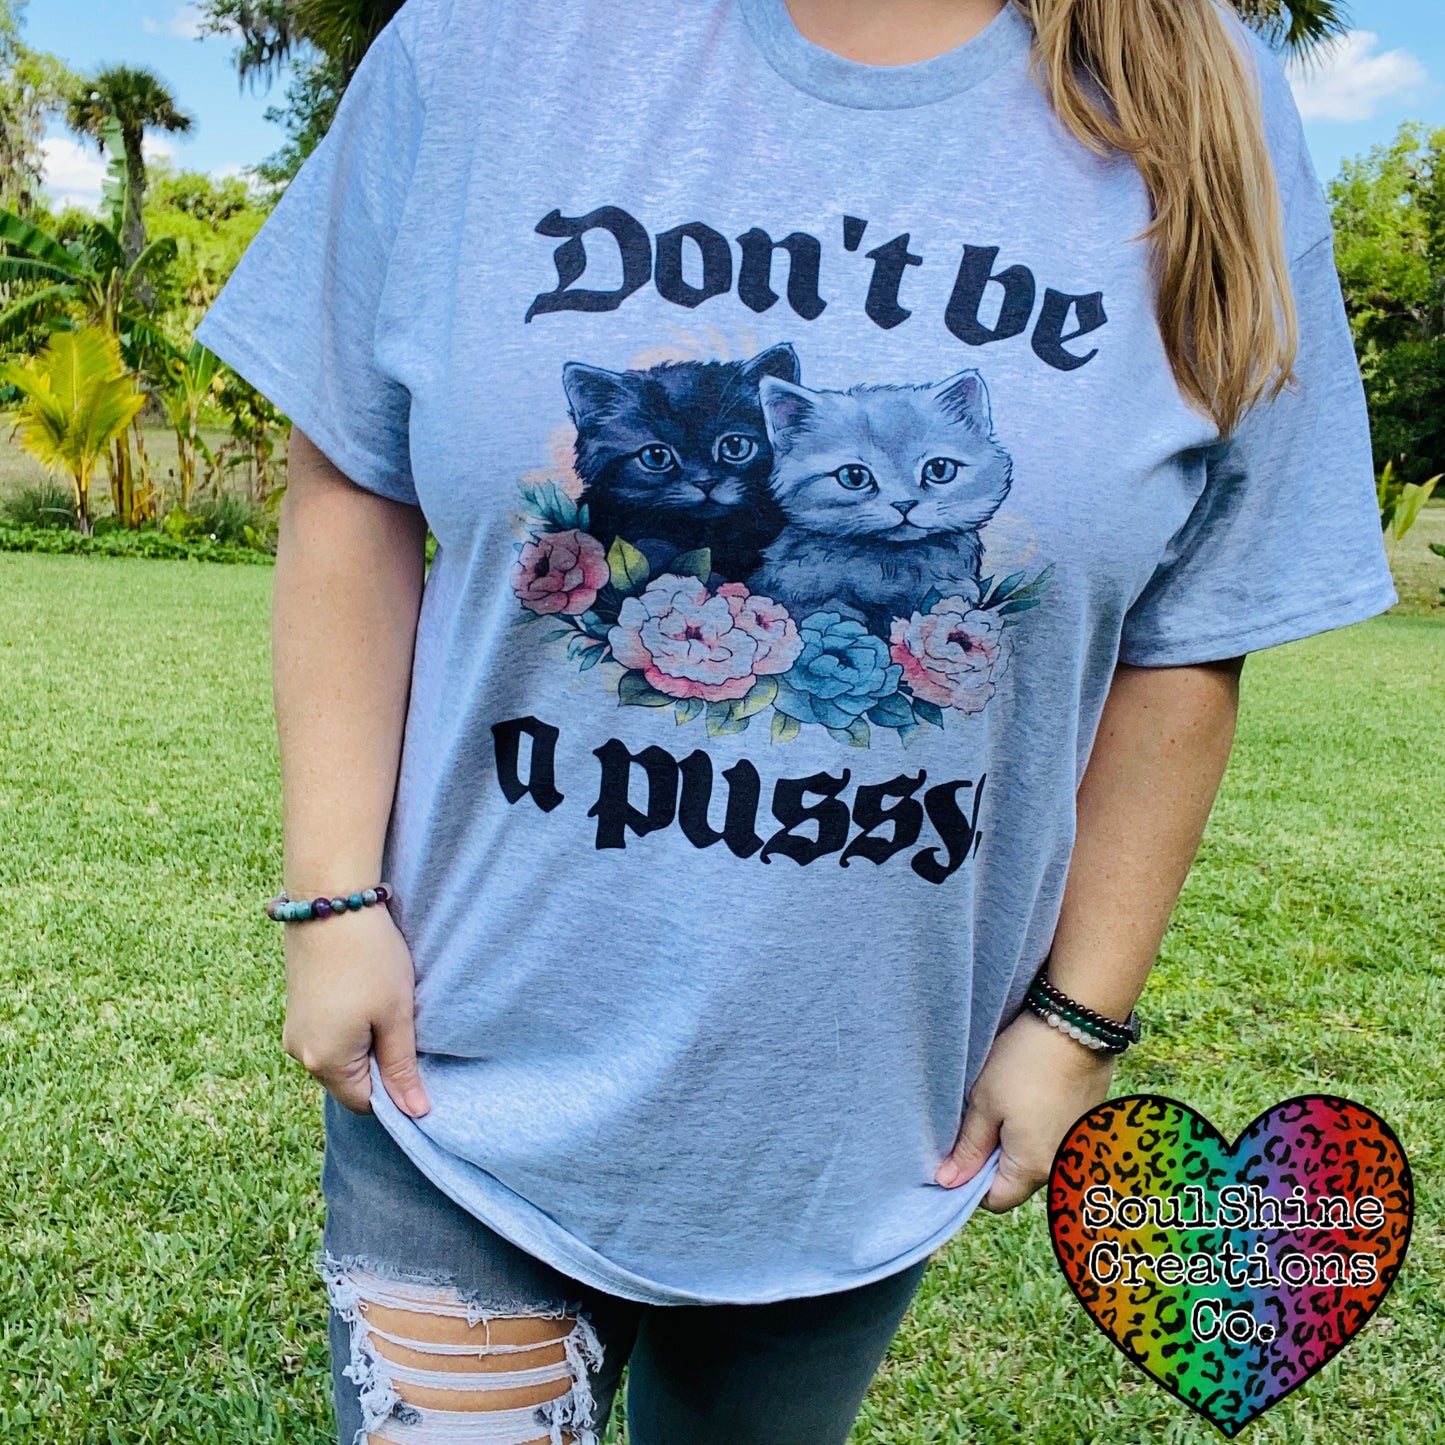 Don’t be a Pussy Graphic Tee Shirt